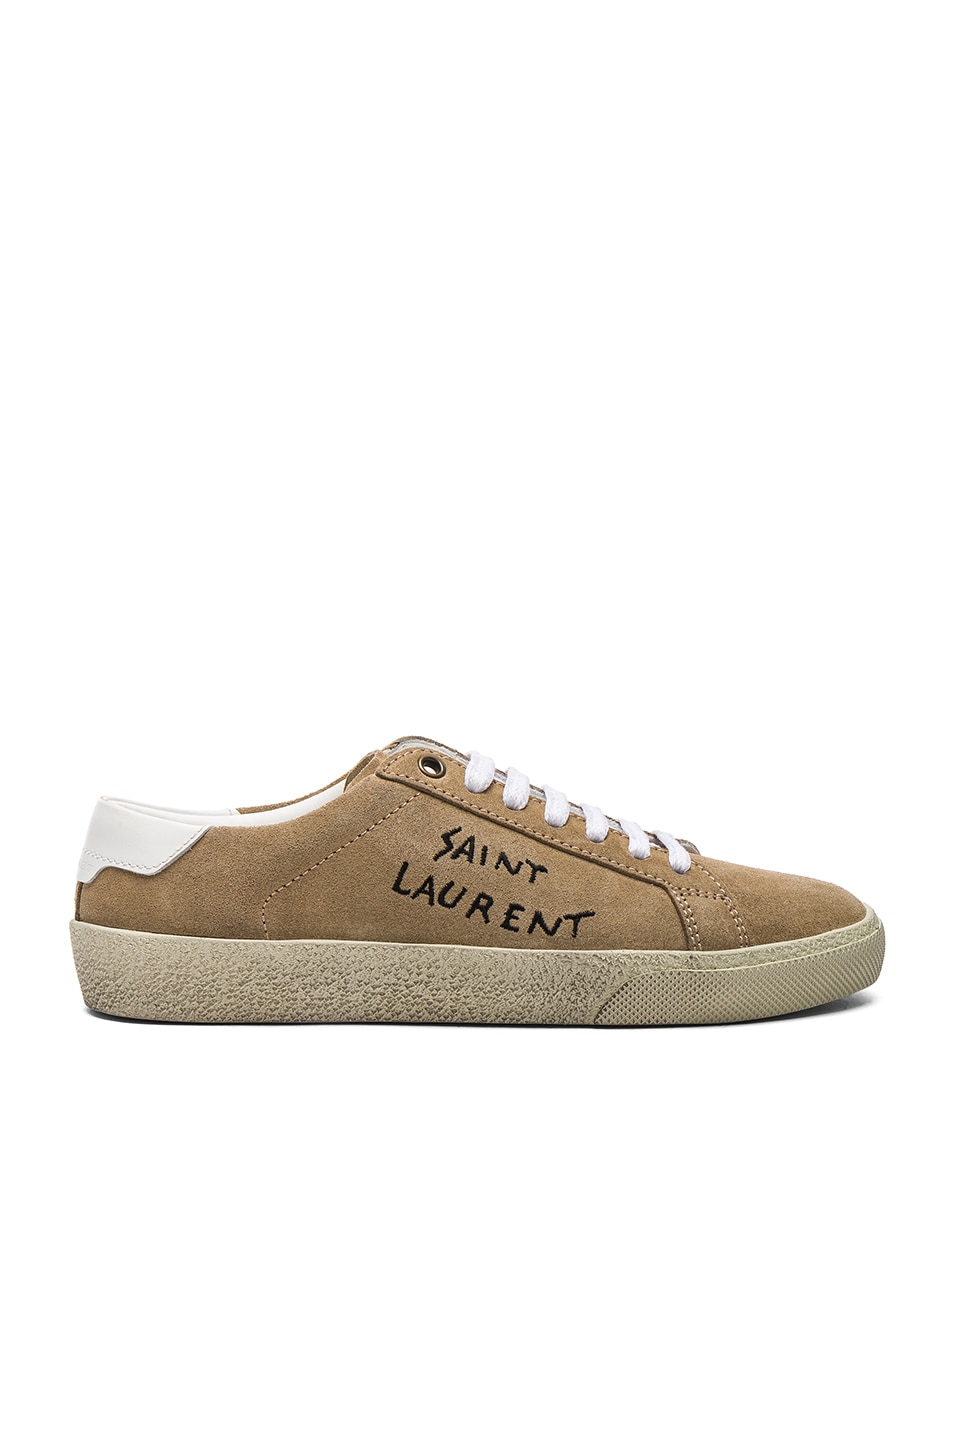 Image 1 of Saint Laurent Embroidered Suede Court Classic Sneakers in Desert & Optic White